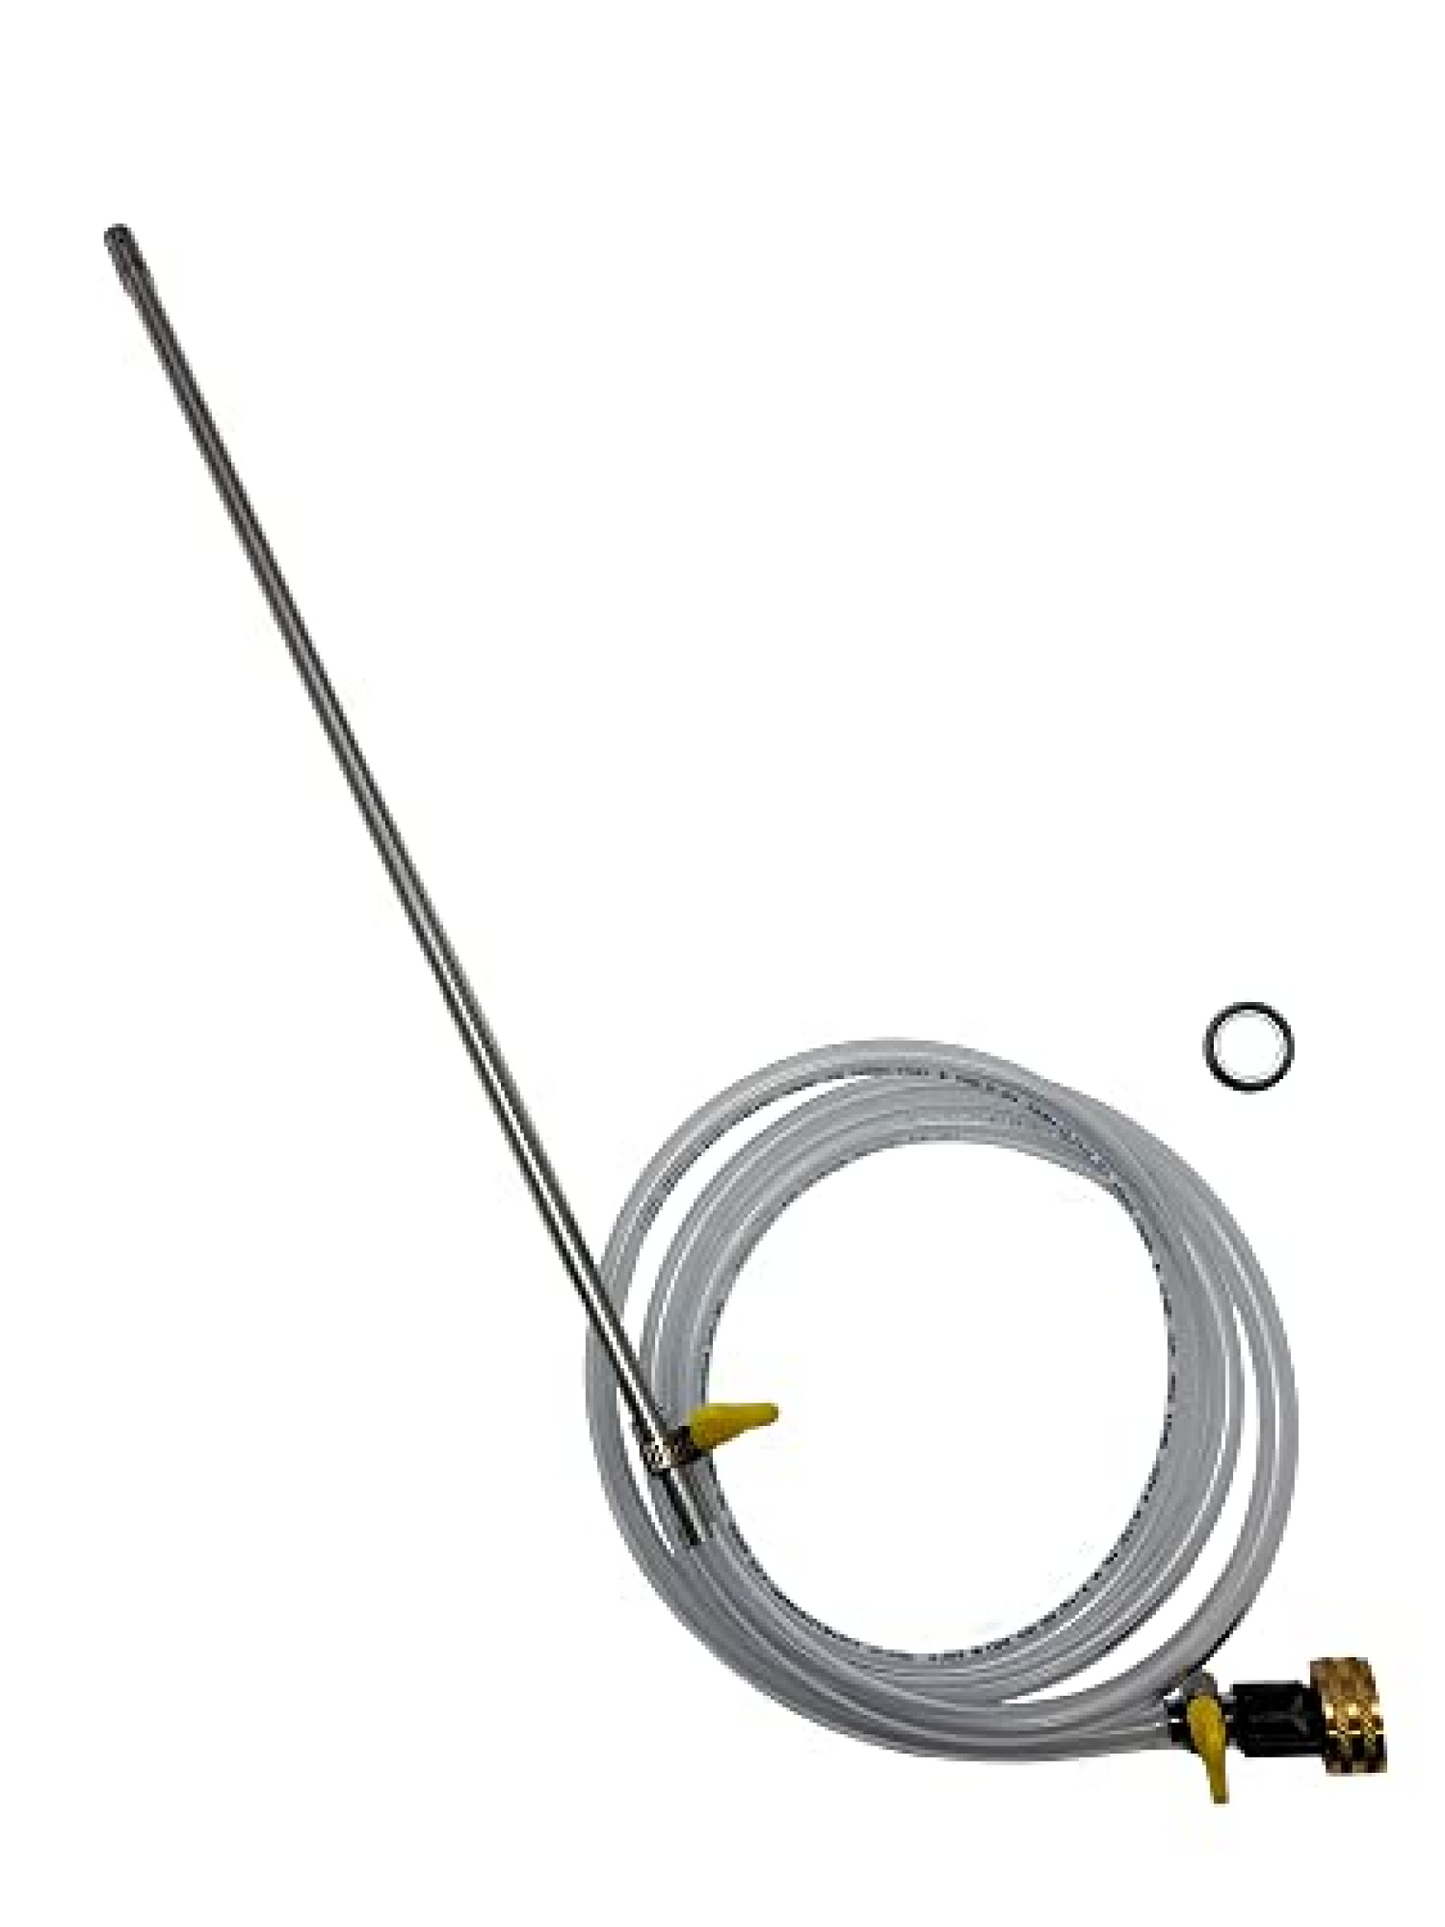 18" Spray Cane with 6 Feet of Tubing Made in Canada. Spraying Wand for Carboy/Bottle Washing. Utility Sink/Garden Hose plus standard facuet adapter hookup. Clean Tubbing.